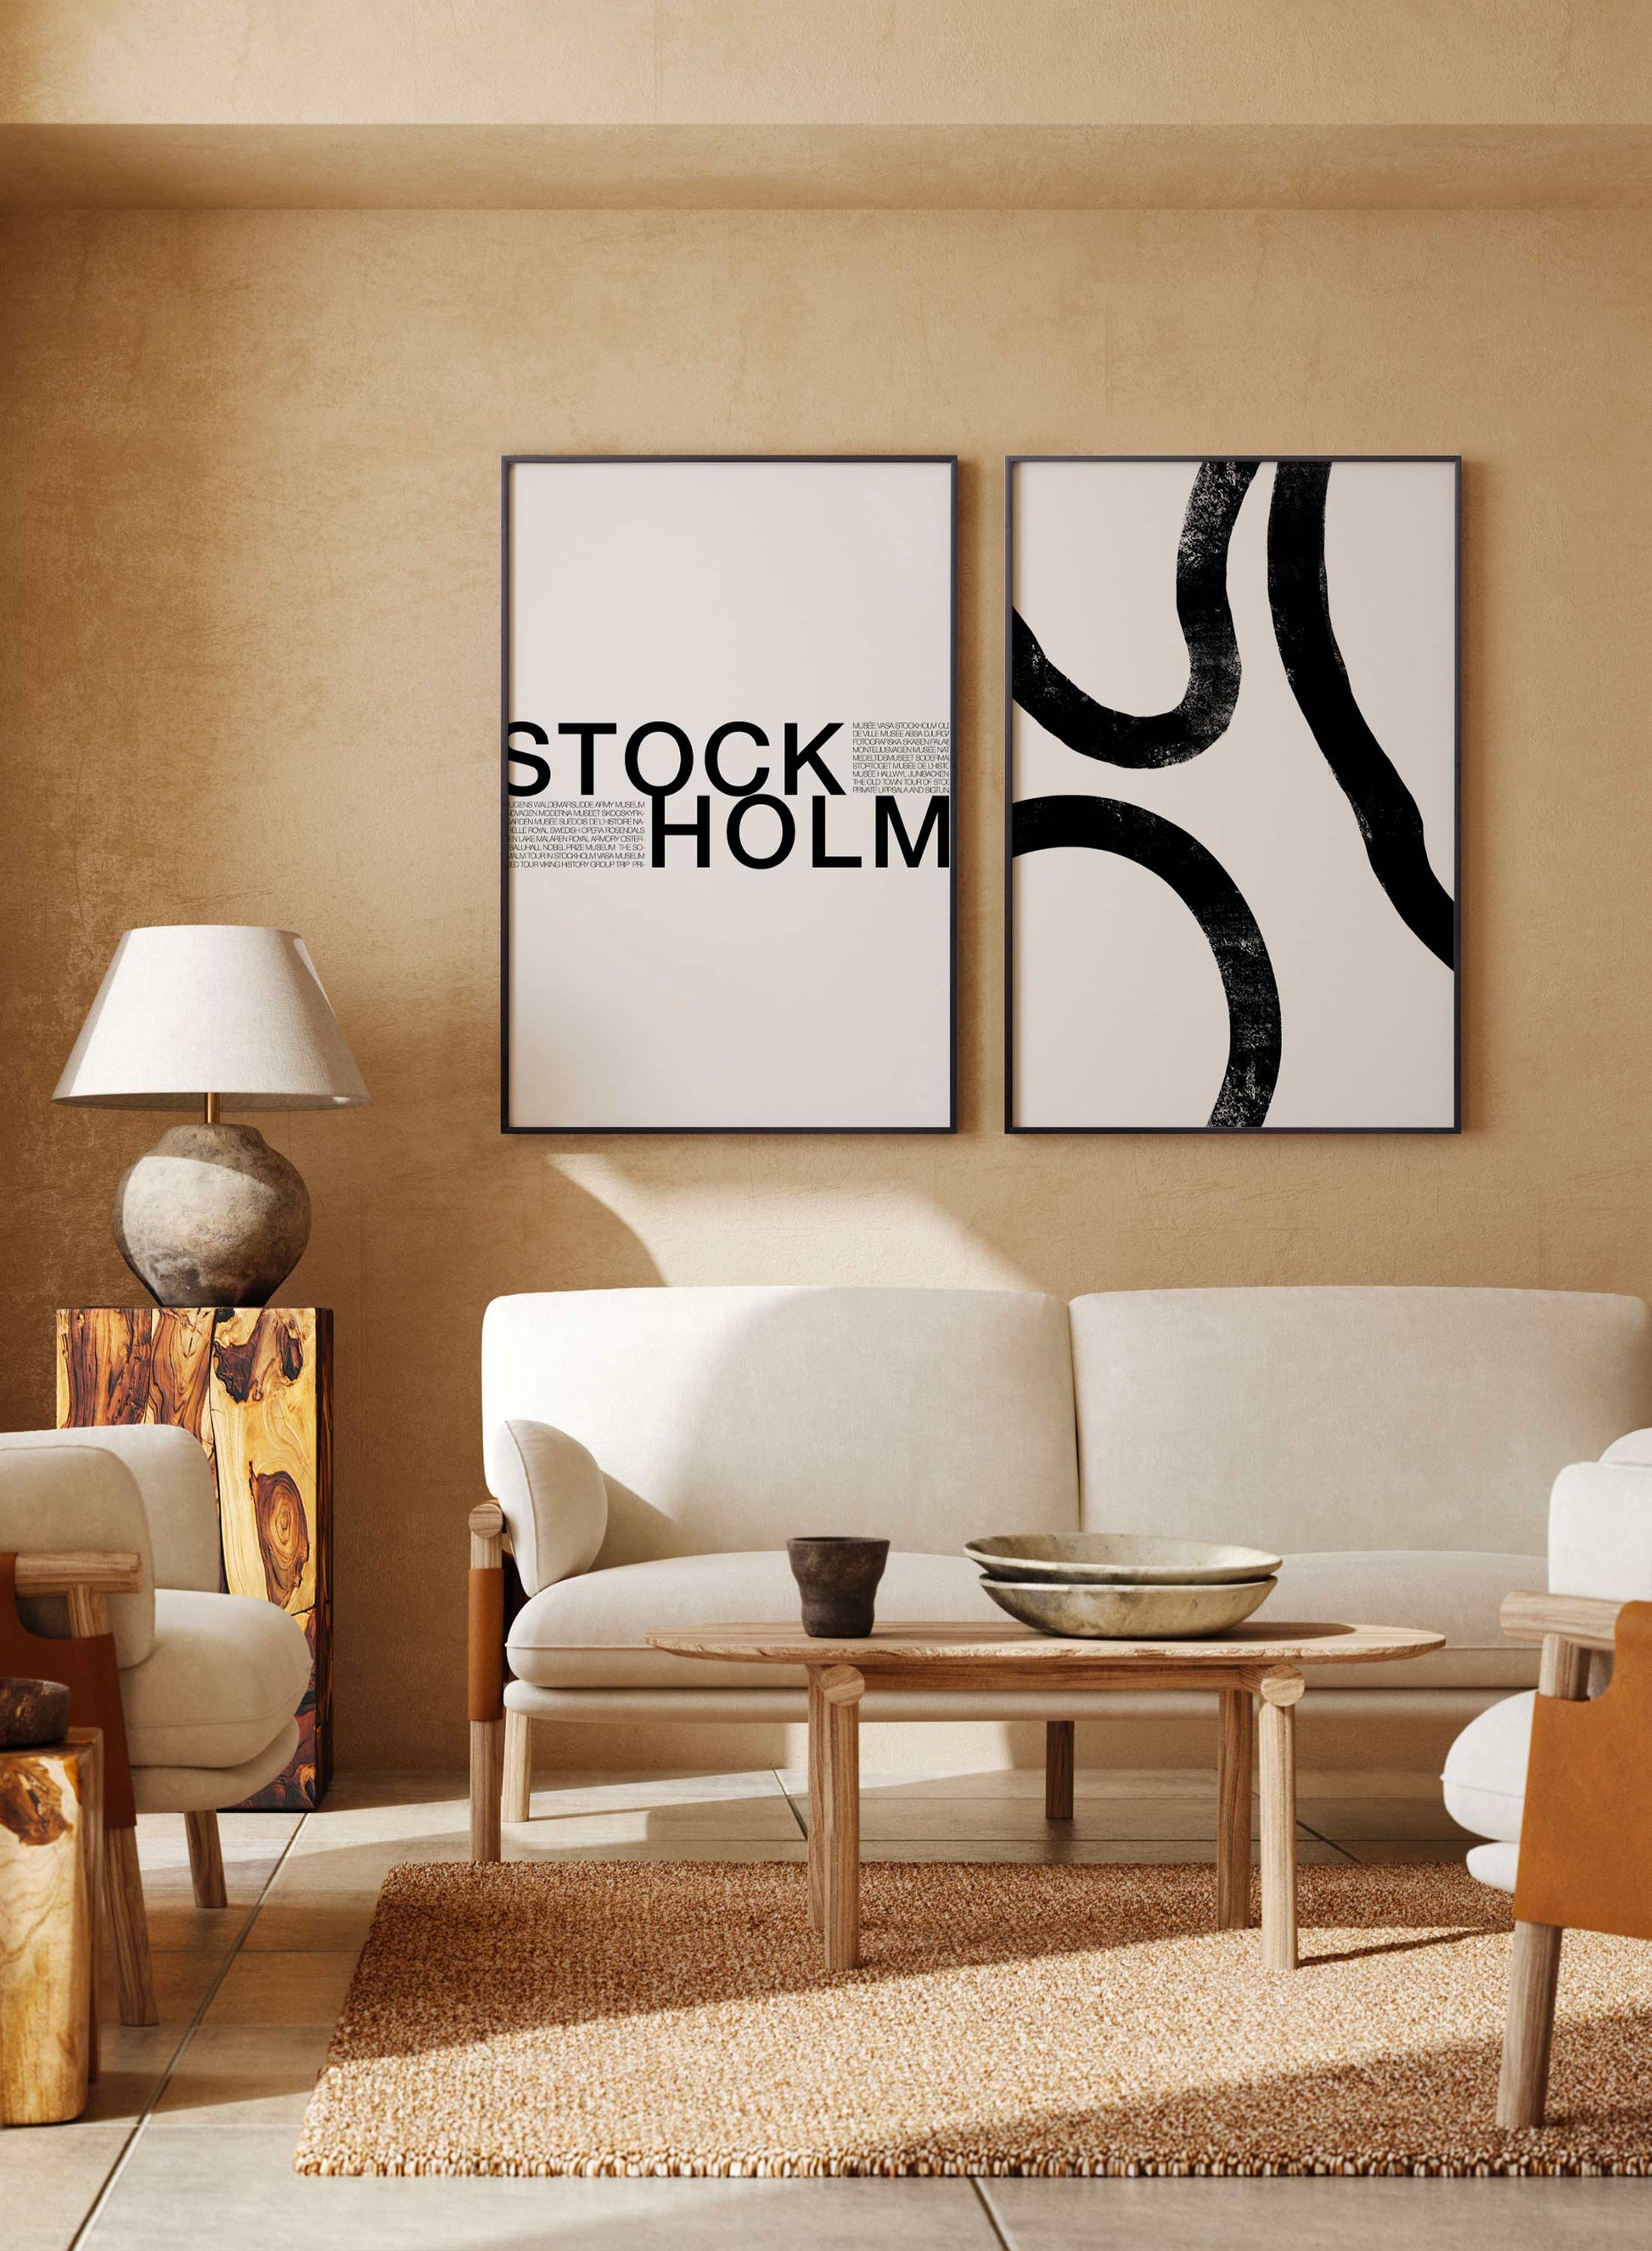 Stockholm Typography, Poster | Oppositewall.com